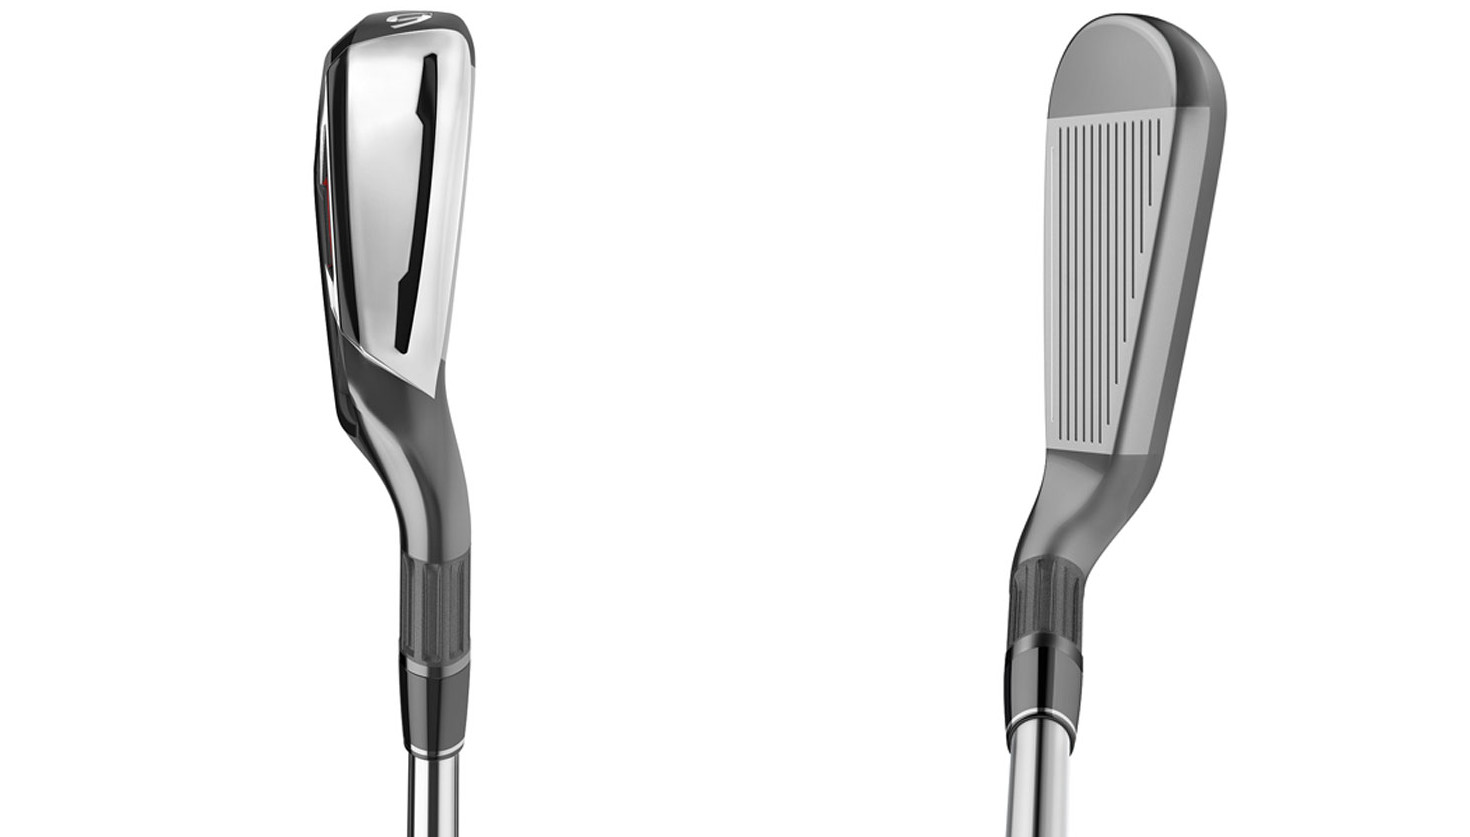 The sole and topline of the M2 irons